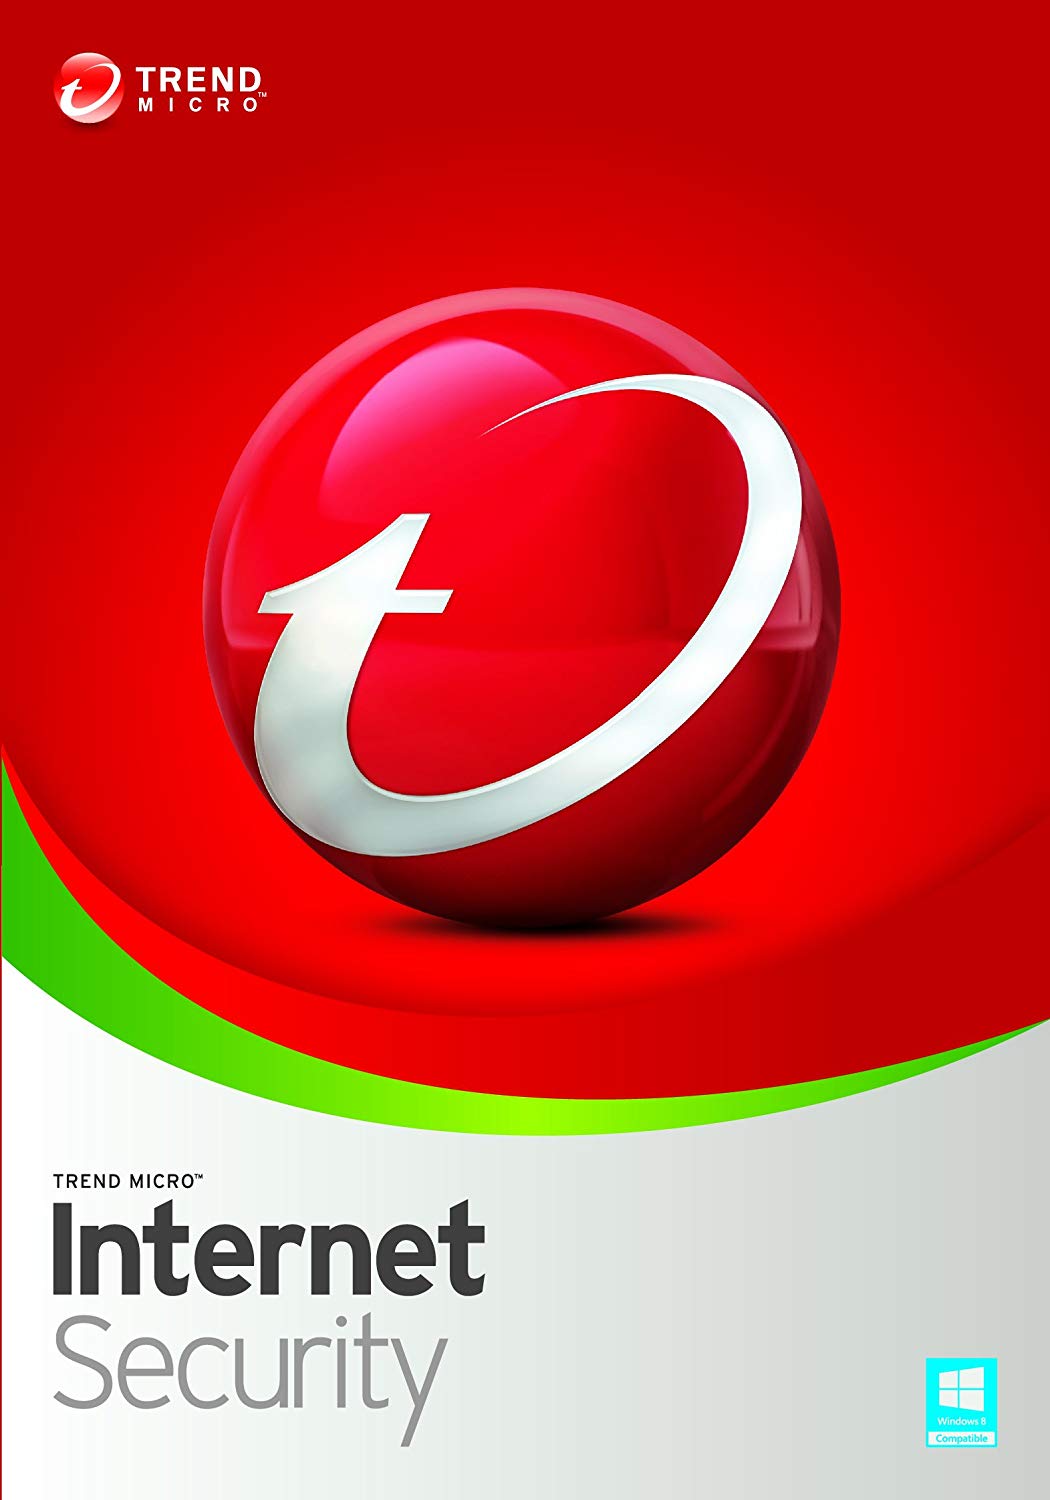 Trend Micro Internet Security CD Key (Digital Download): Unlimited Devices